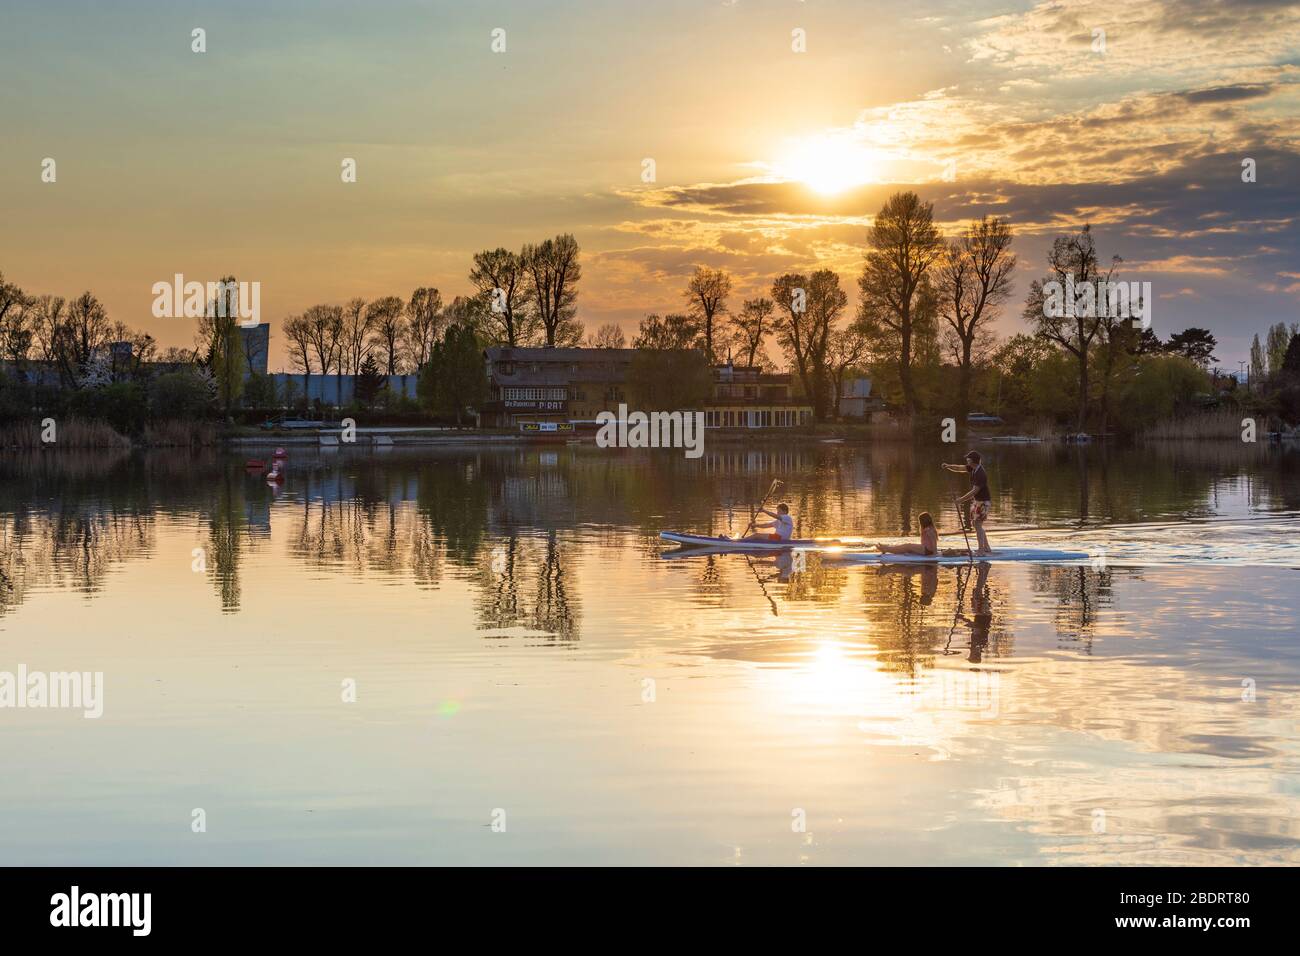 Wien, Vienna: people at canoe and SUP at river Alte Donau (Old Danube) at sunset, in 22. Donaustadt, Wien, Austria Stock Photo